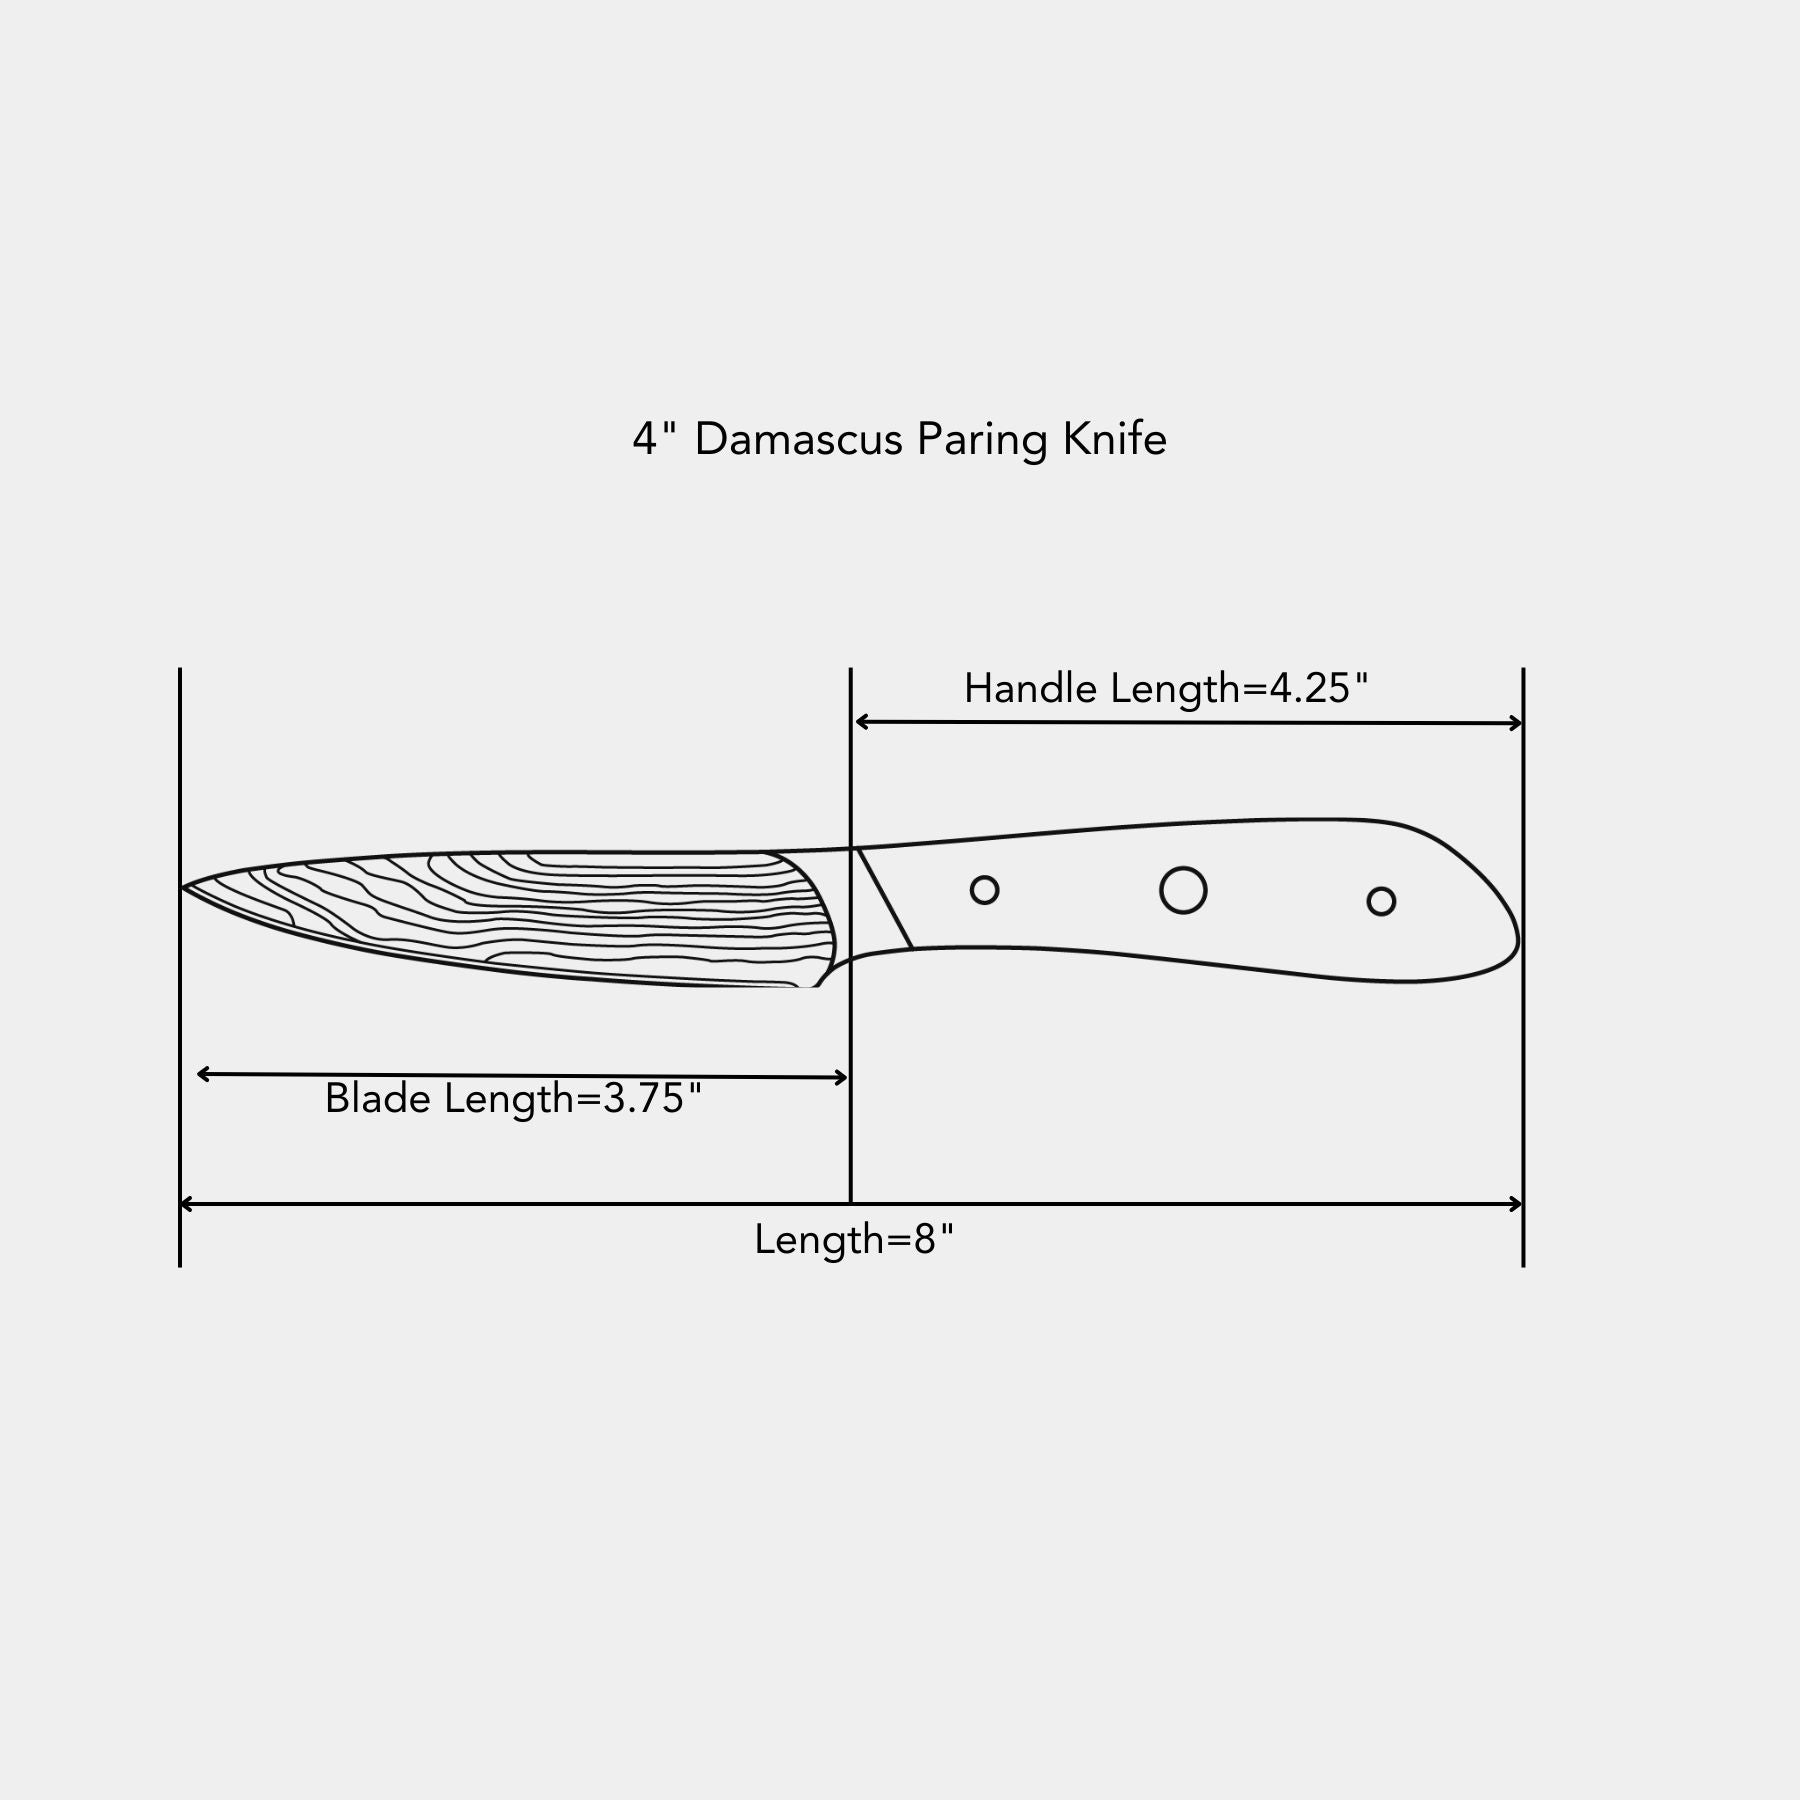 4" Damascus Paring Knife dimensions of blade and handle length